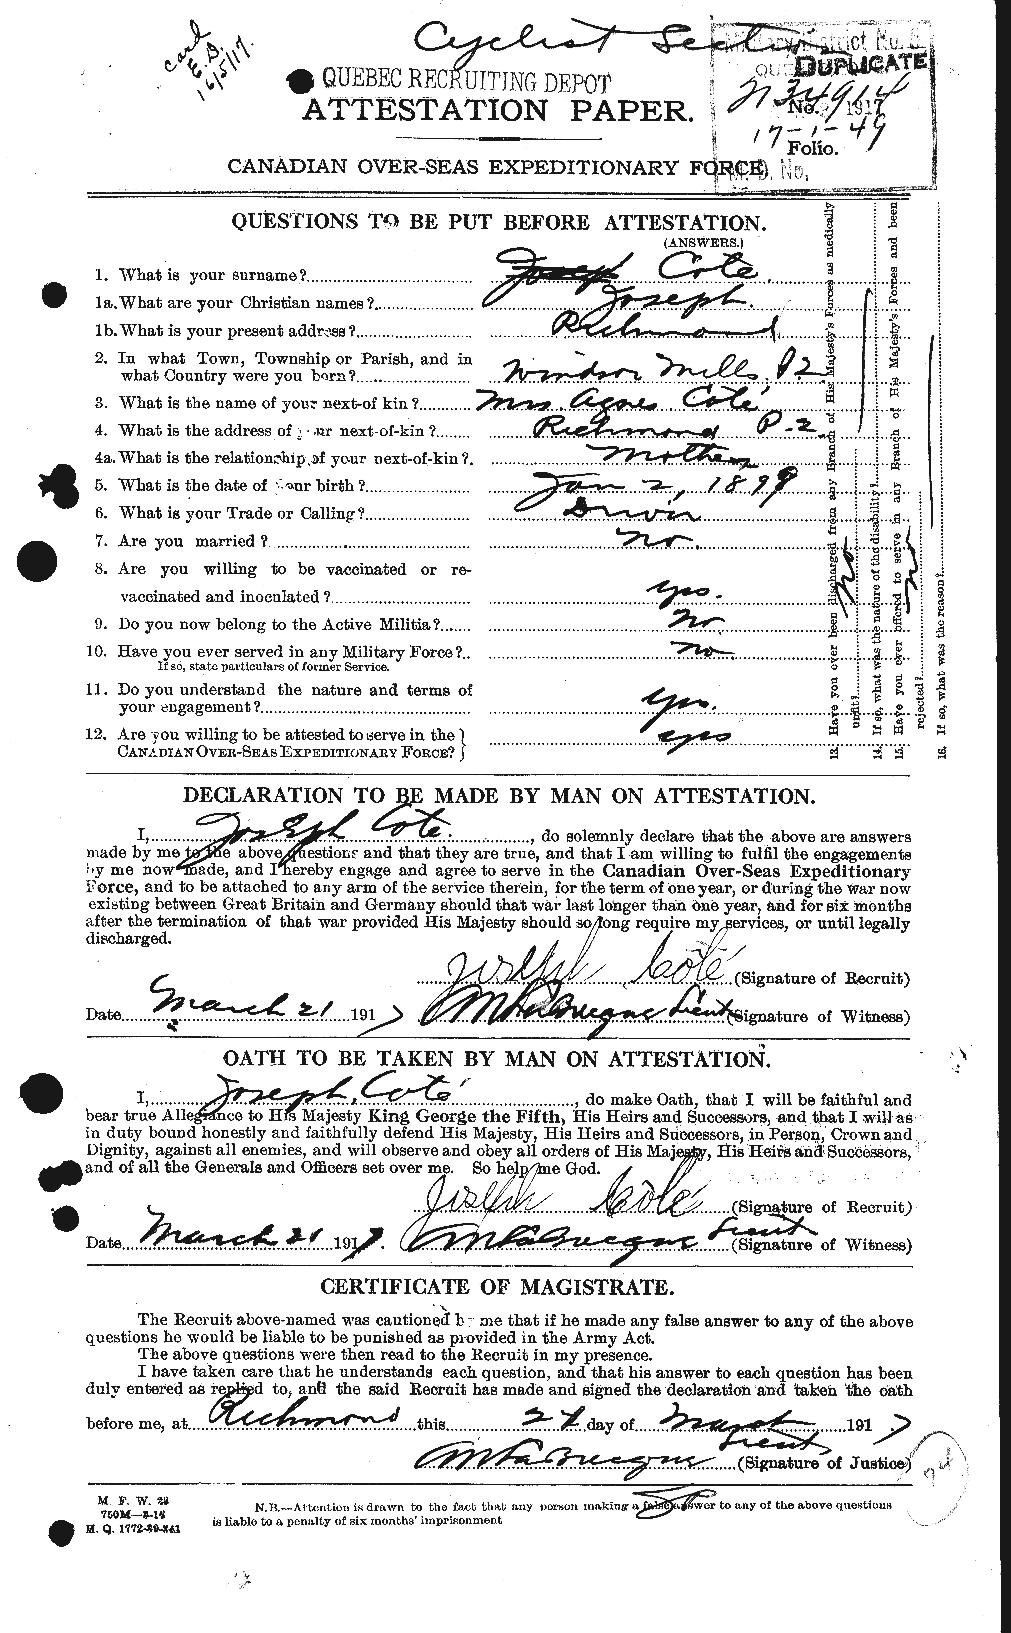 Personnel Records of the First World War - CEF 063978a